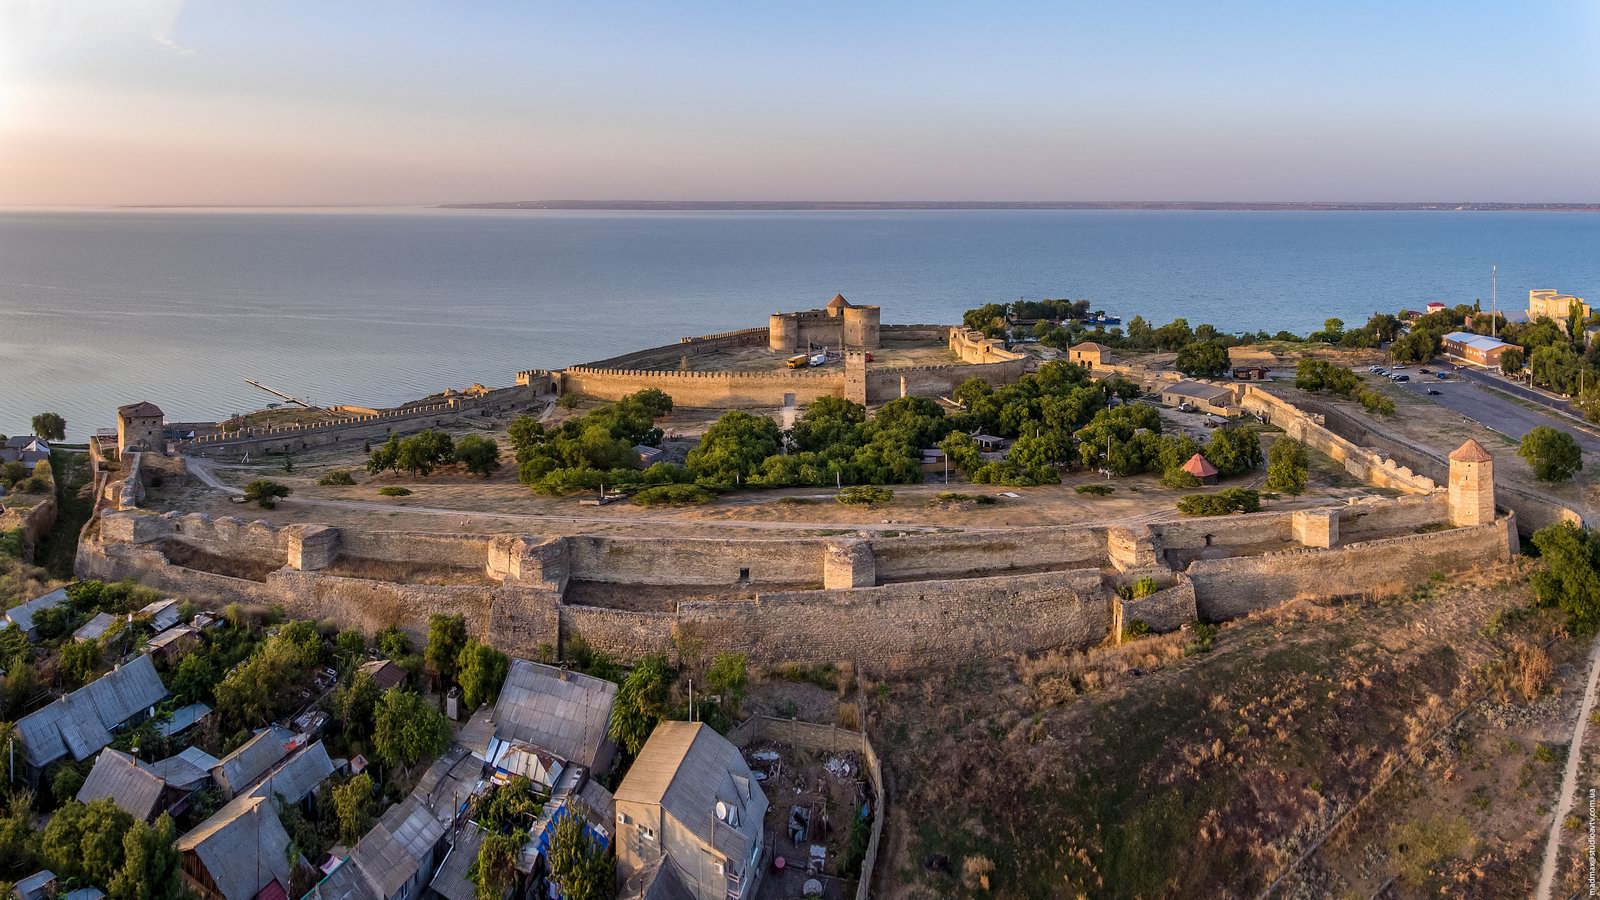 Premium Photo  Akkerman fortress medieval castle near the sea stronghold  in ukraine ruins of the citadel of the bilhoroddnistrovskyi fortress  ukraine one of the largest fortresses in eastern europe